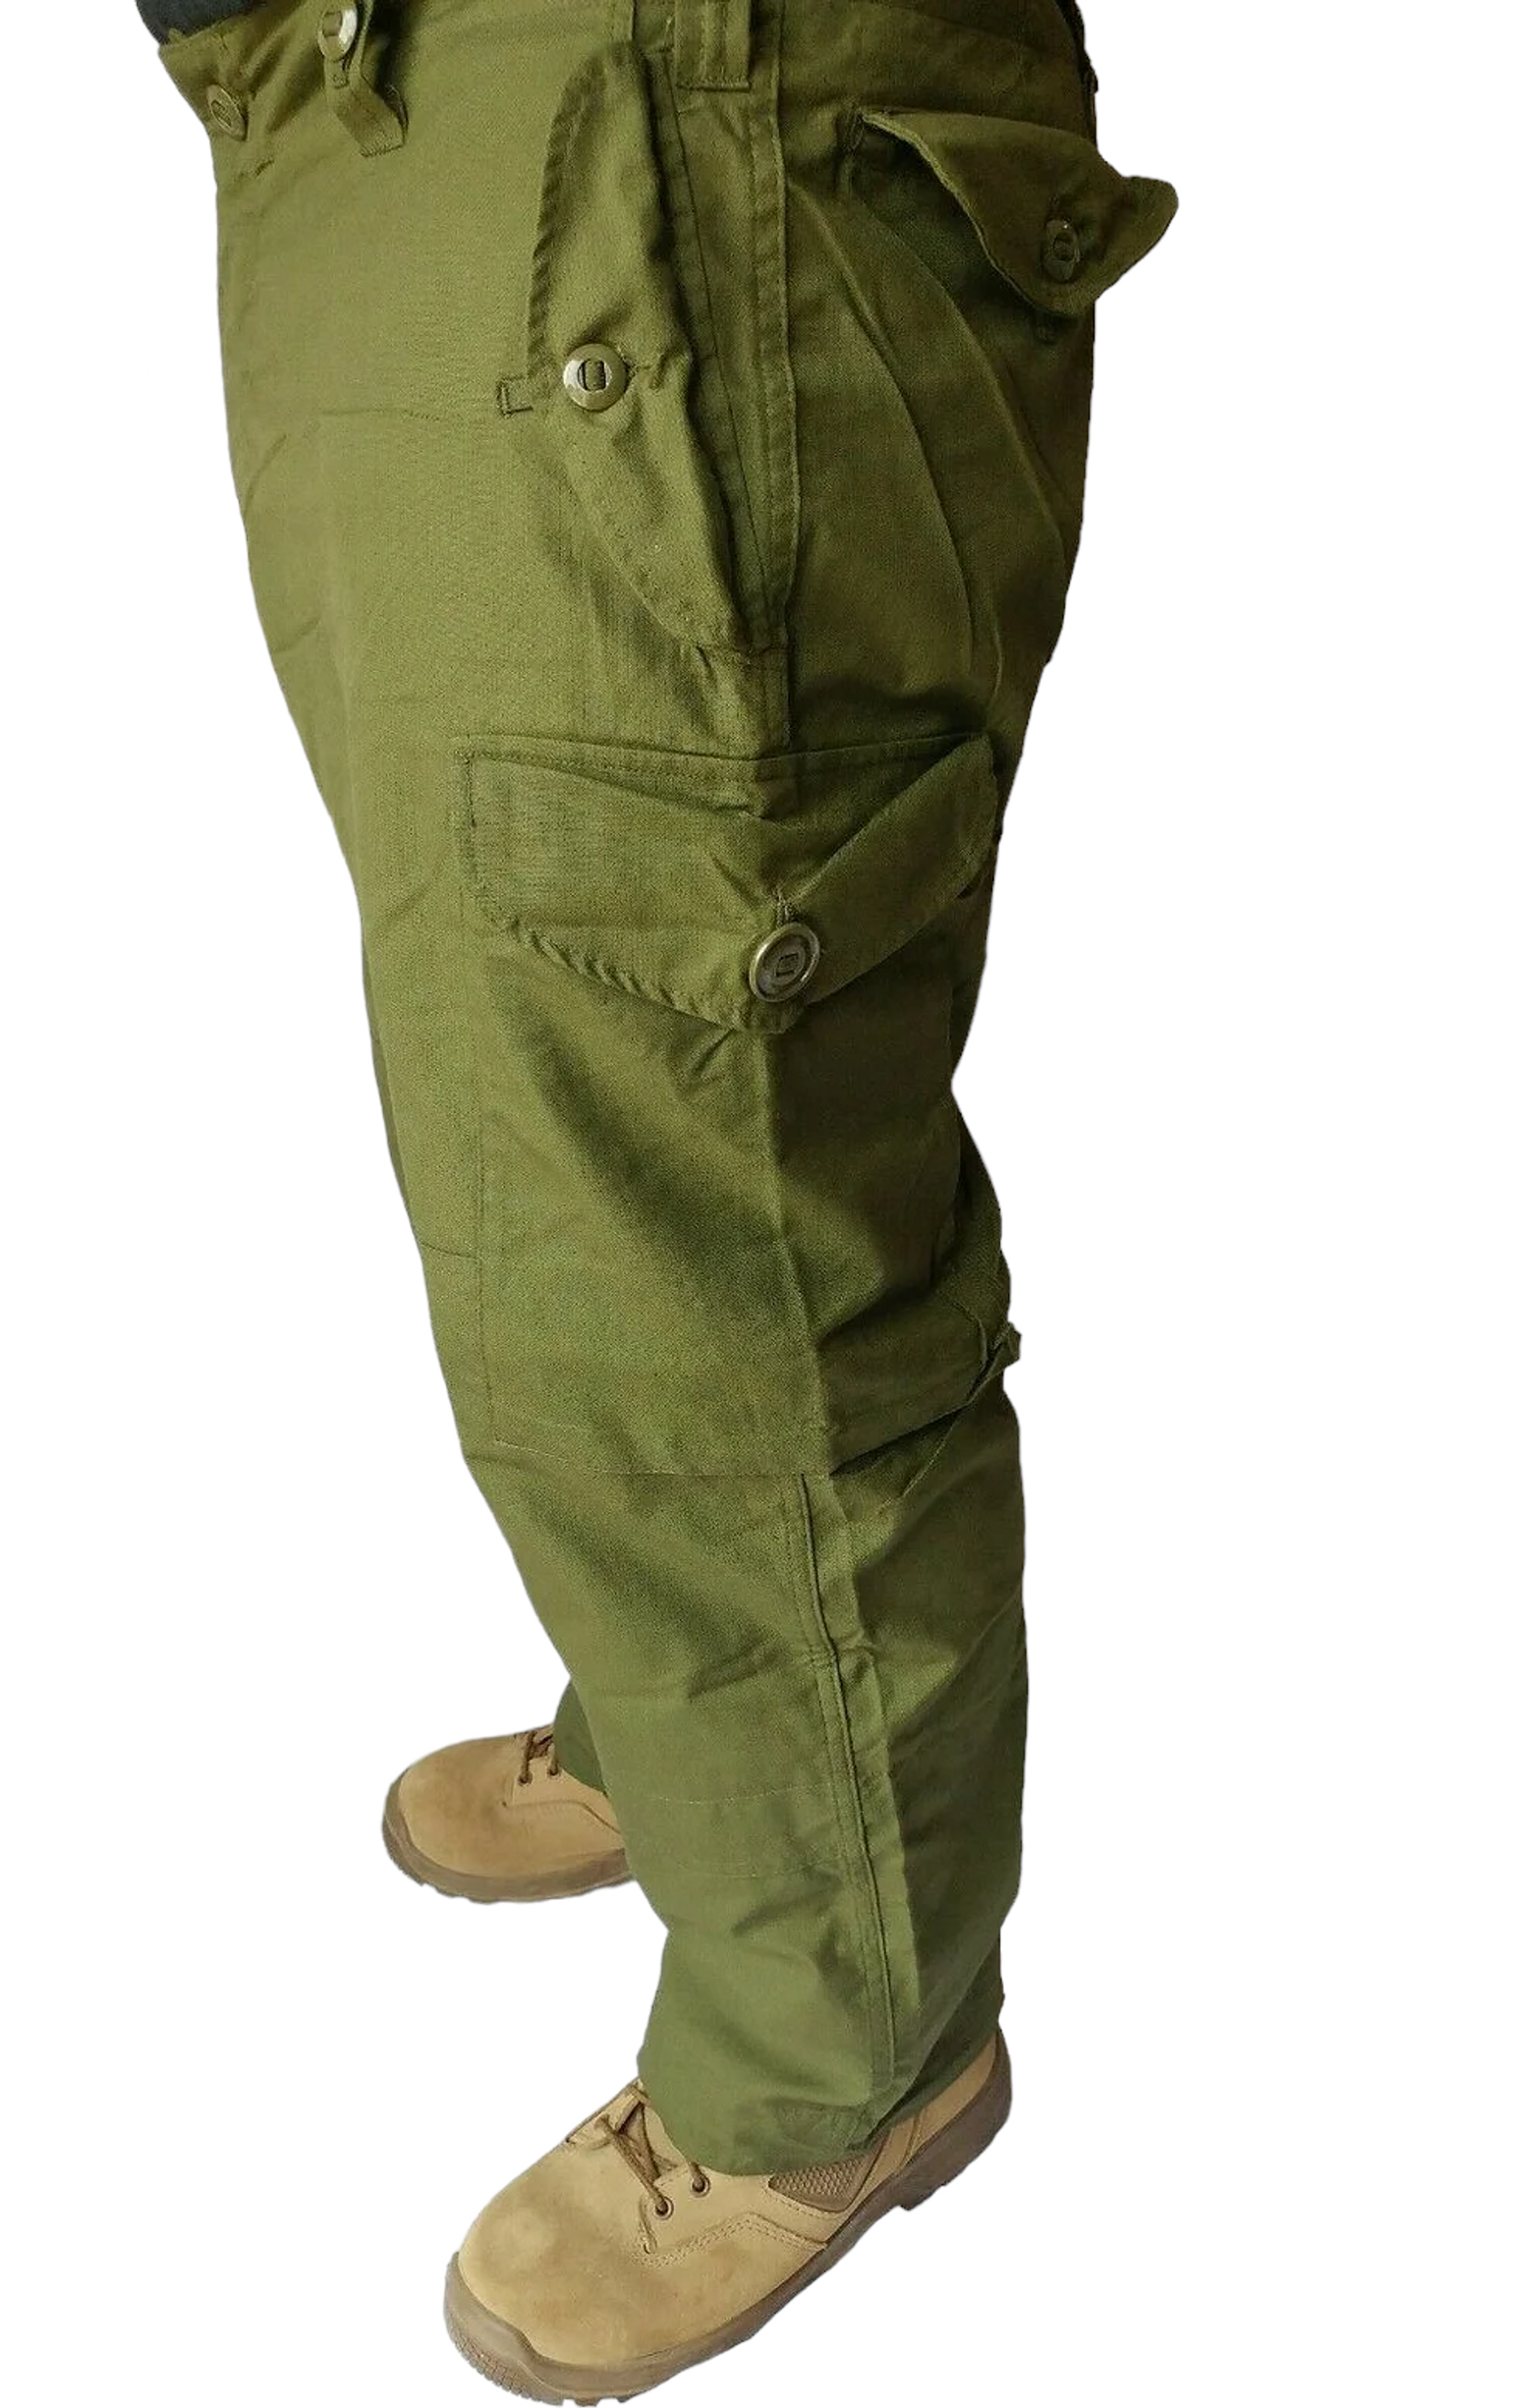 Canadian Armed Forces Lightweight Combat Pants